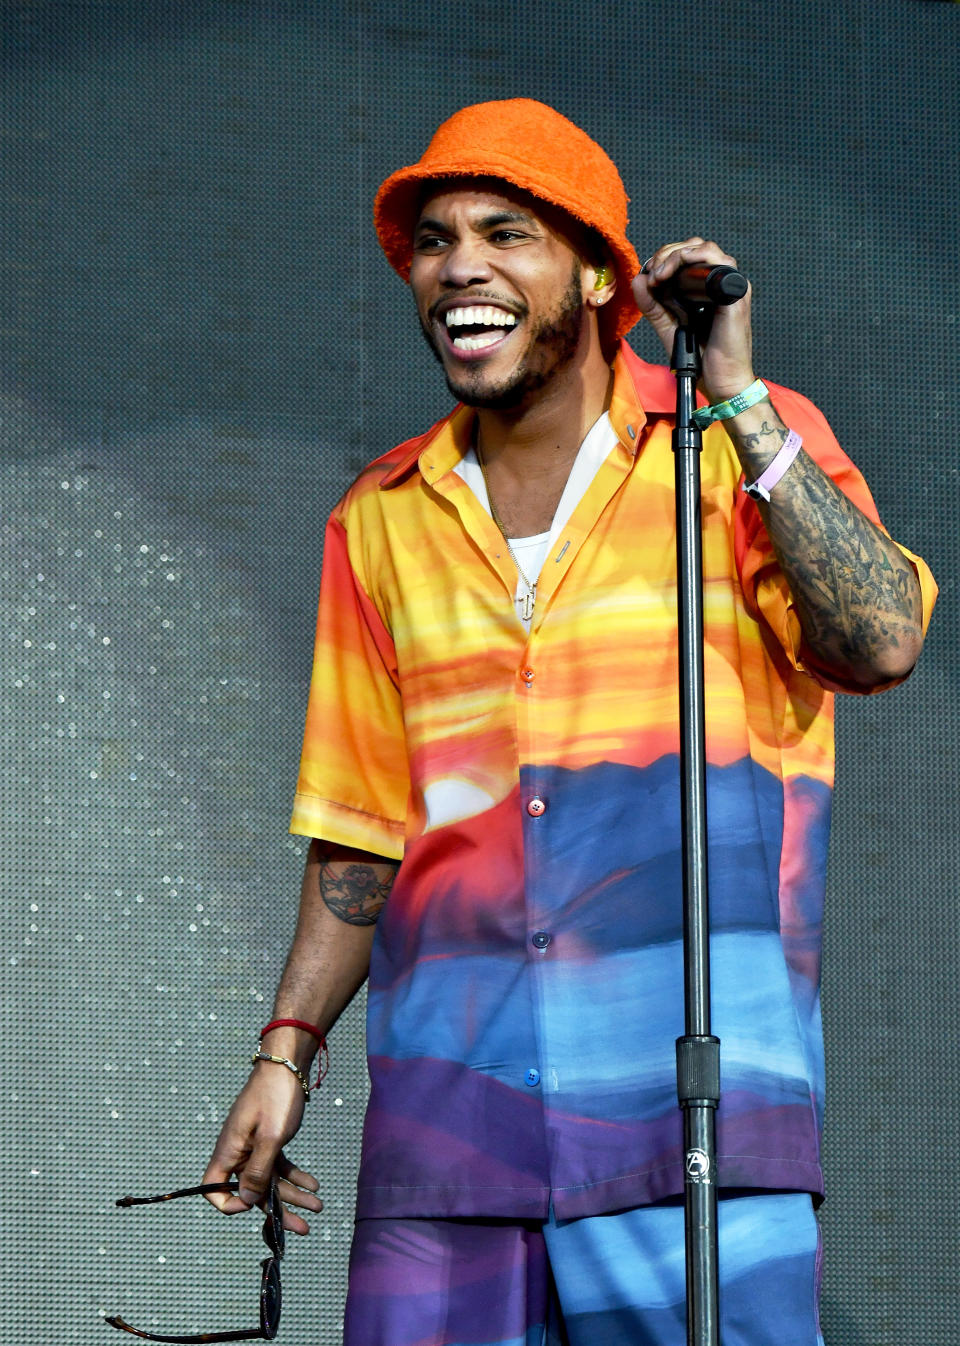 Best Coachella Fashion Looks | Anderson .Paak & The Free Nationals performs at Coachella Stage during the 2019 Coachella Valley Music And Arts Festival on April 19, 2019 in Indio, California